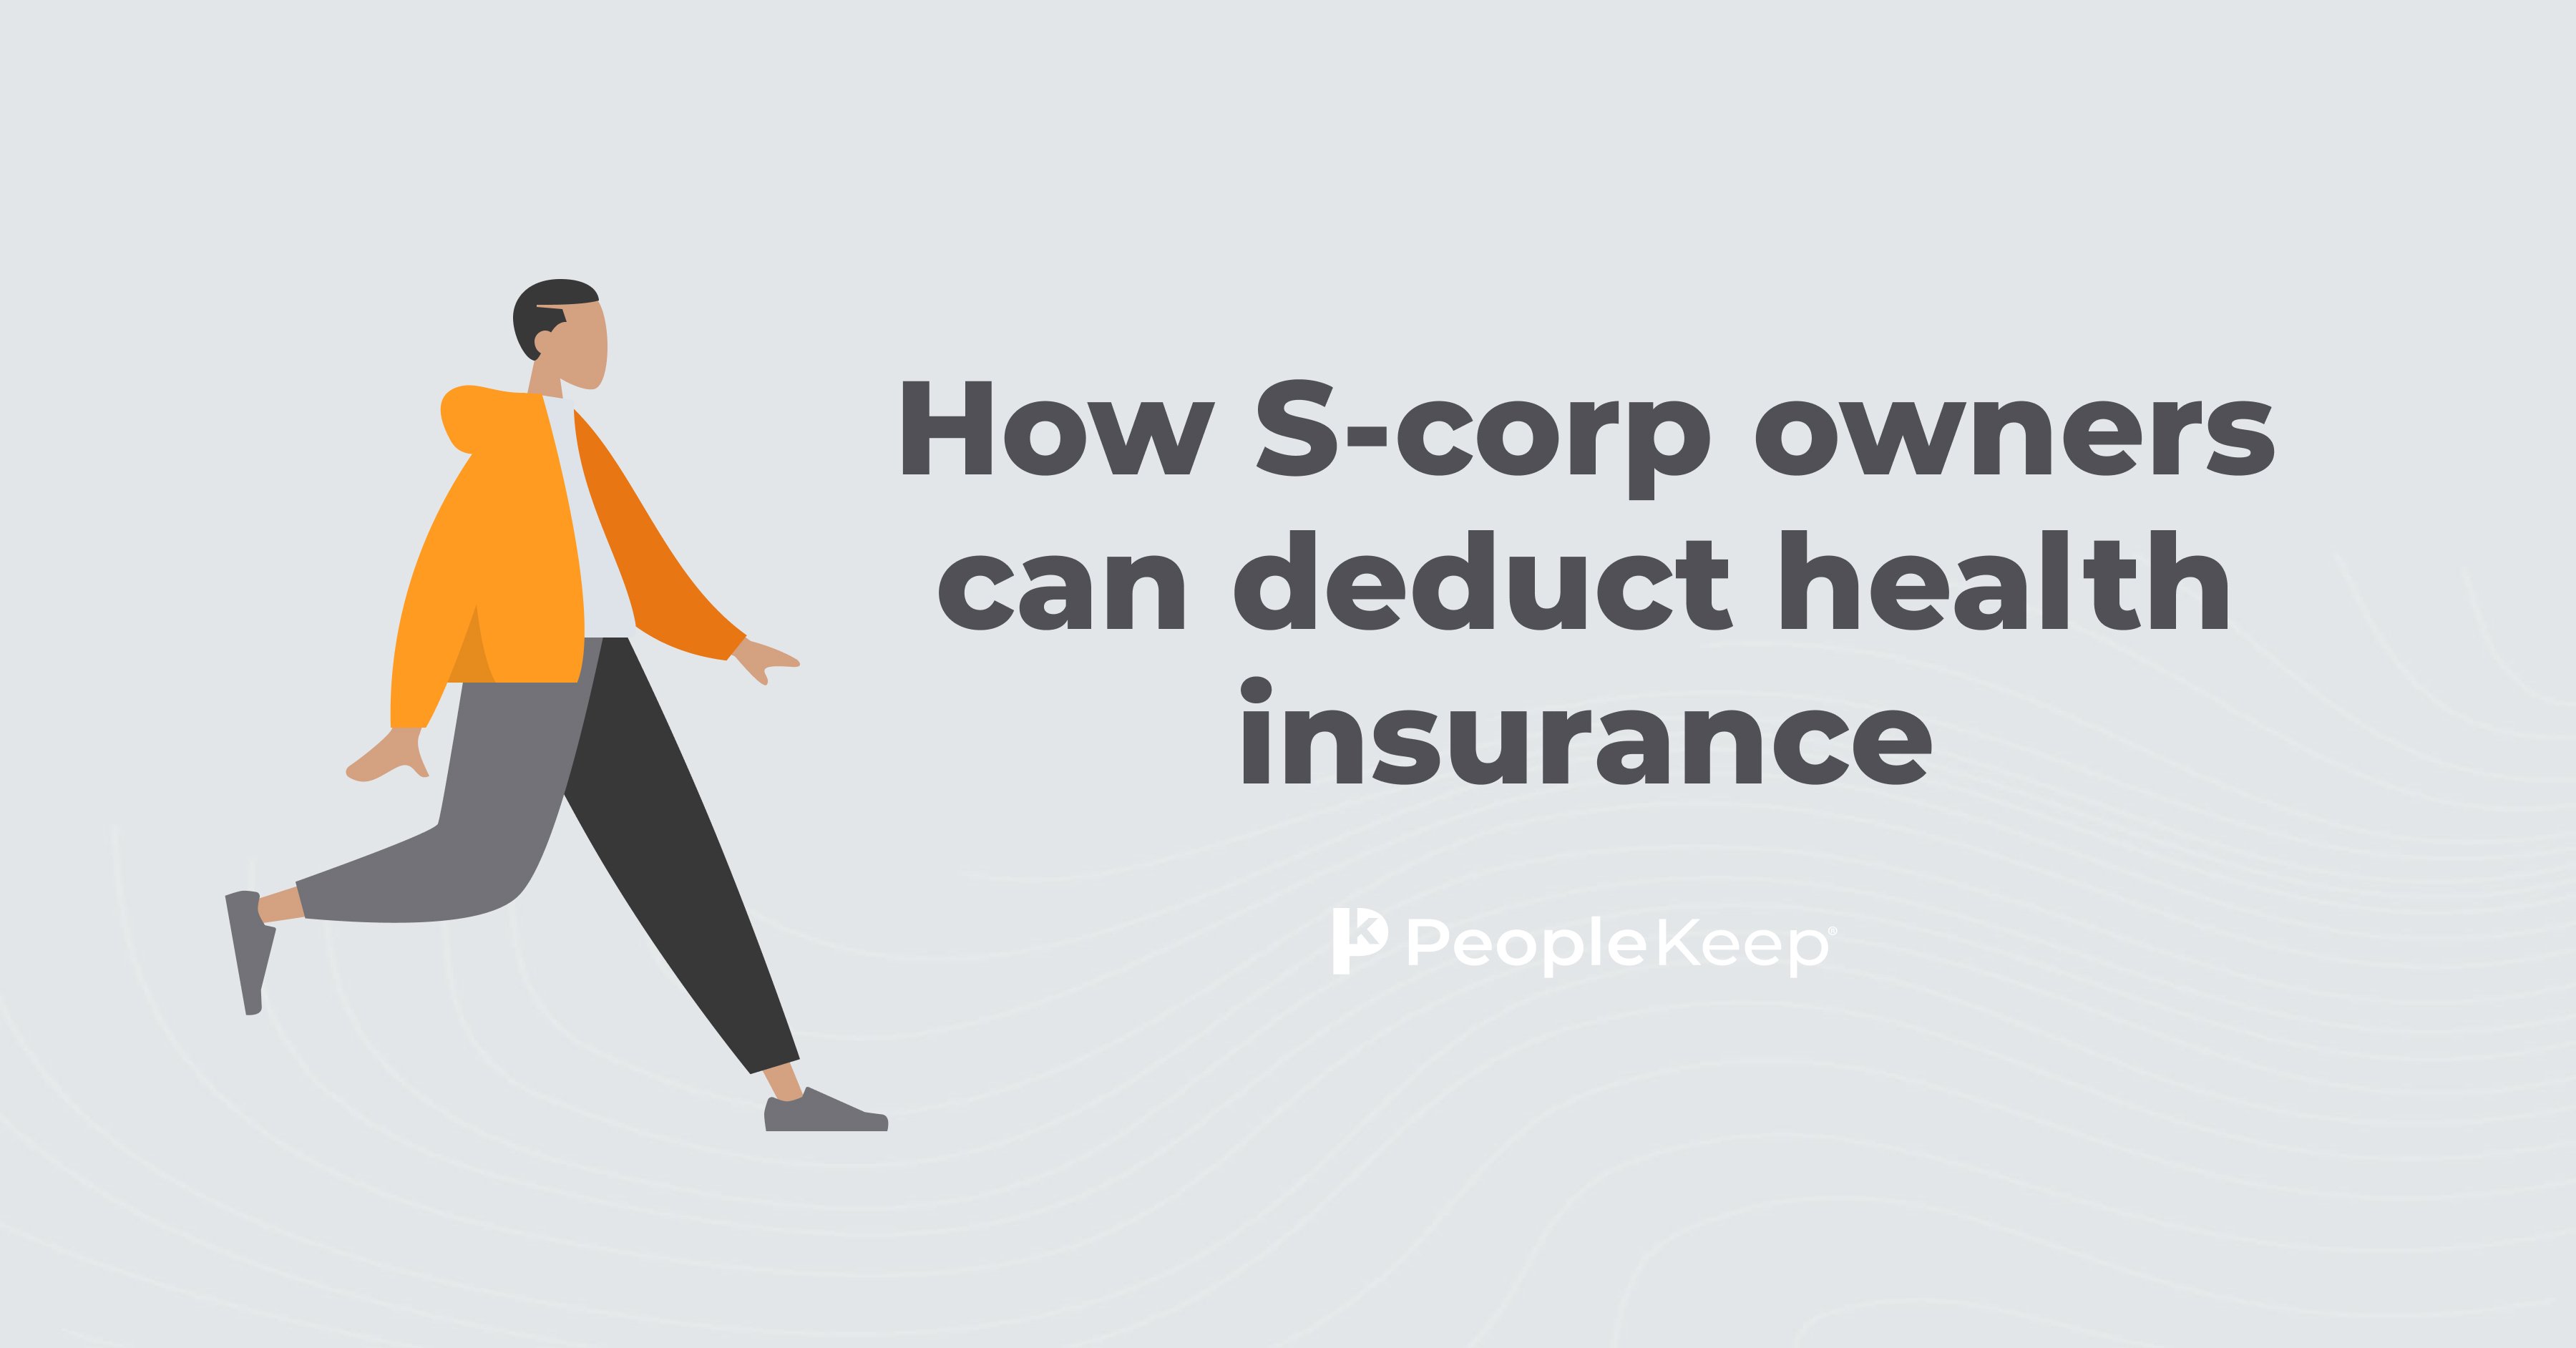 How Scorp owners can deduct health insurance